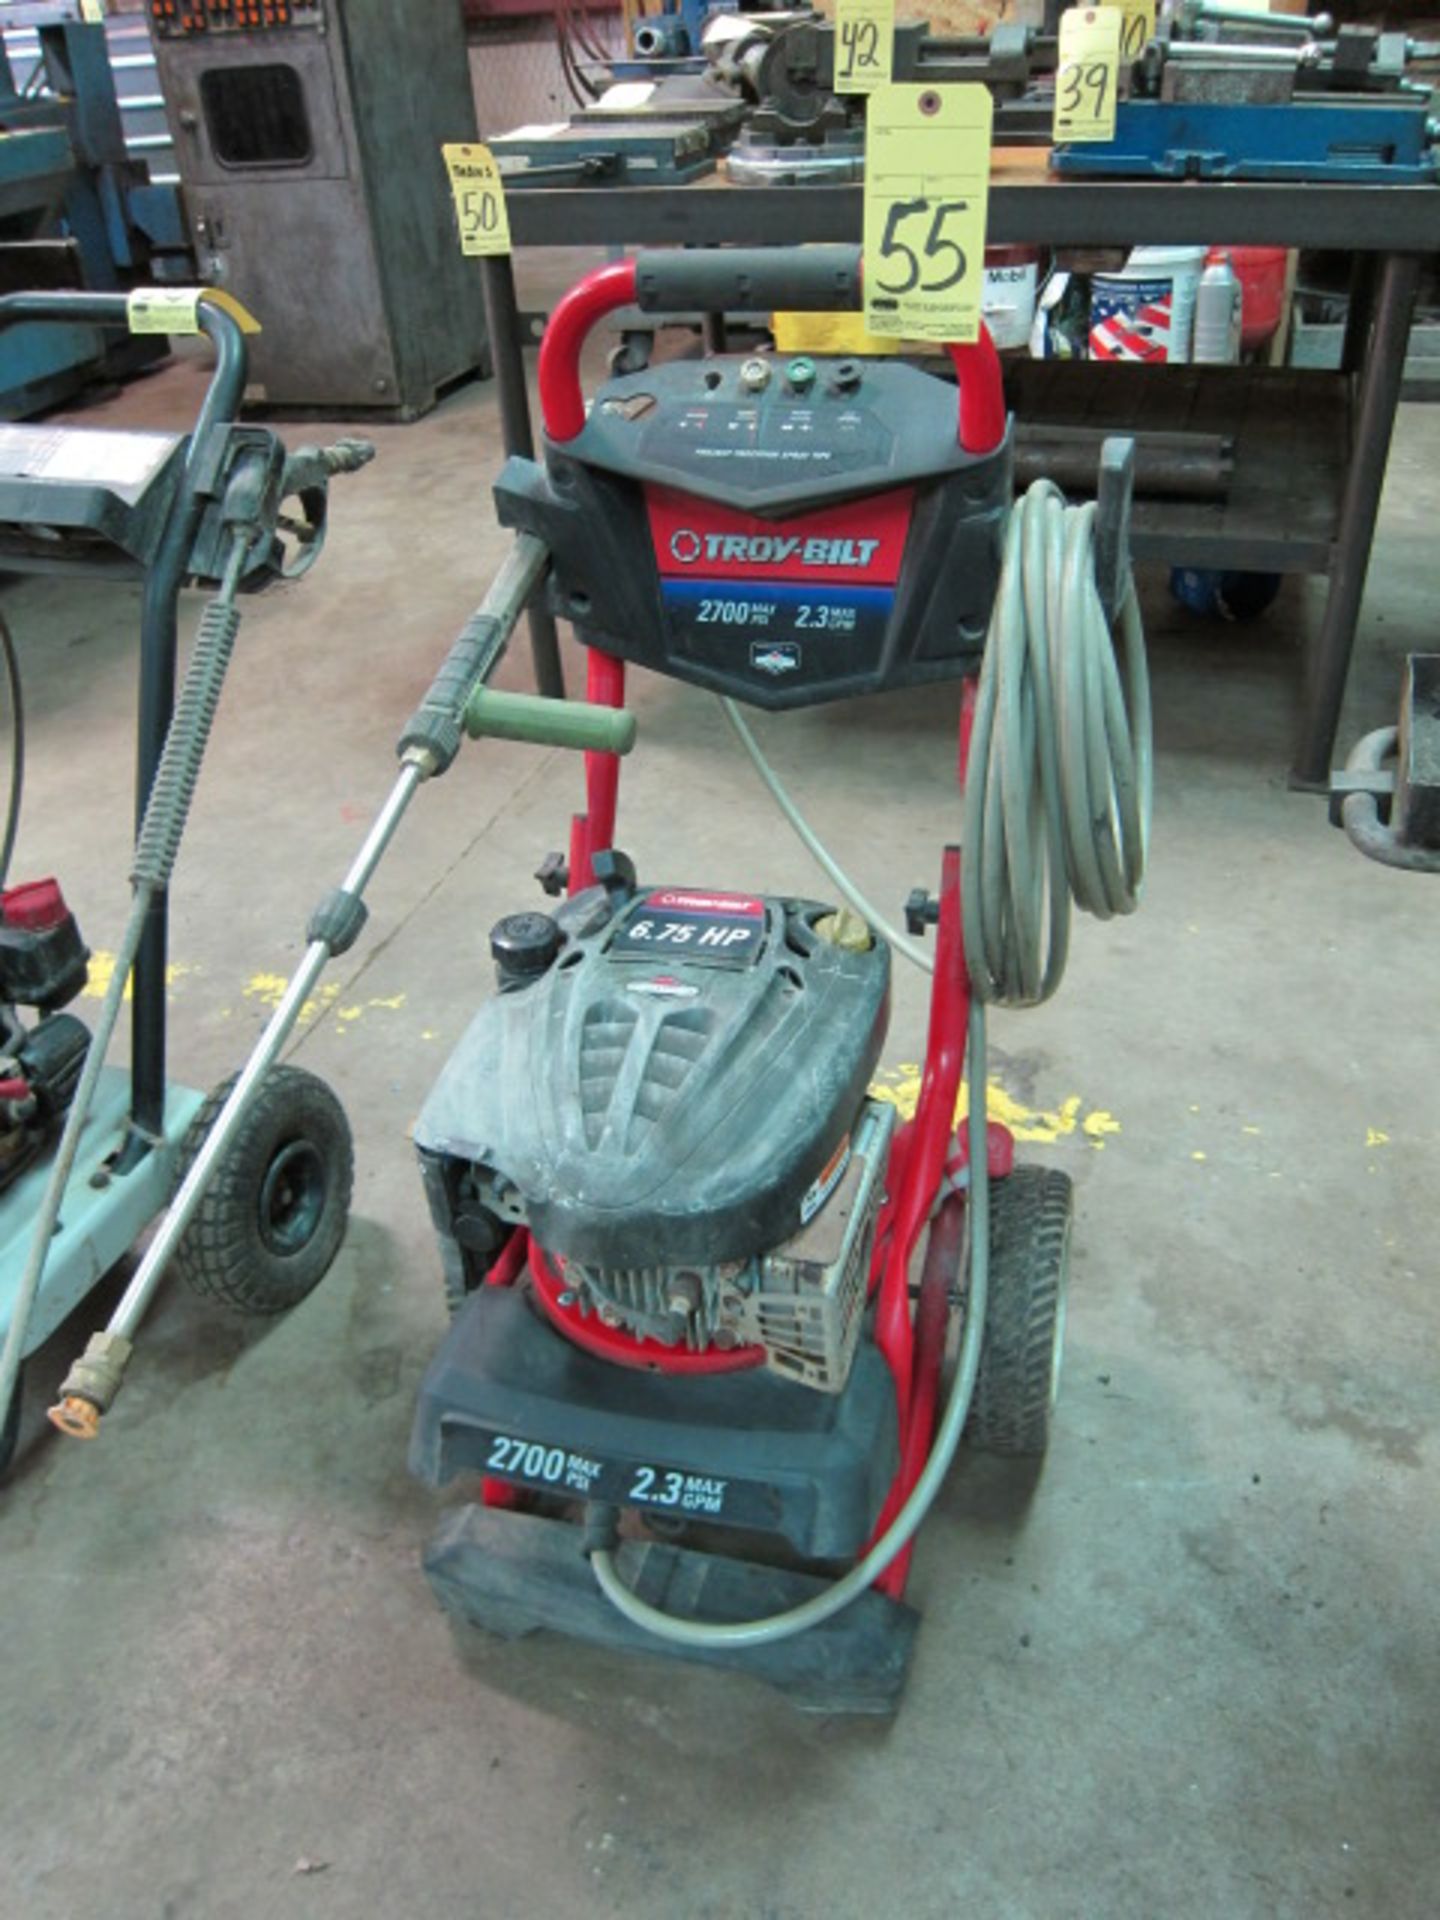 POWER WASHER, TROY-BILT, 6.75 HP motor, 2,700 max. PSI, 2.3 max. GPM